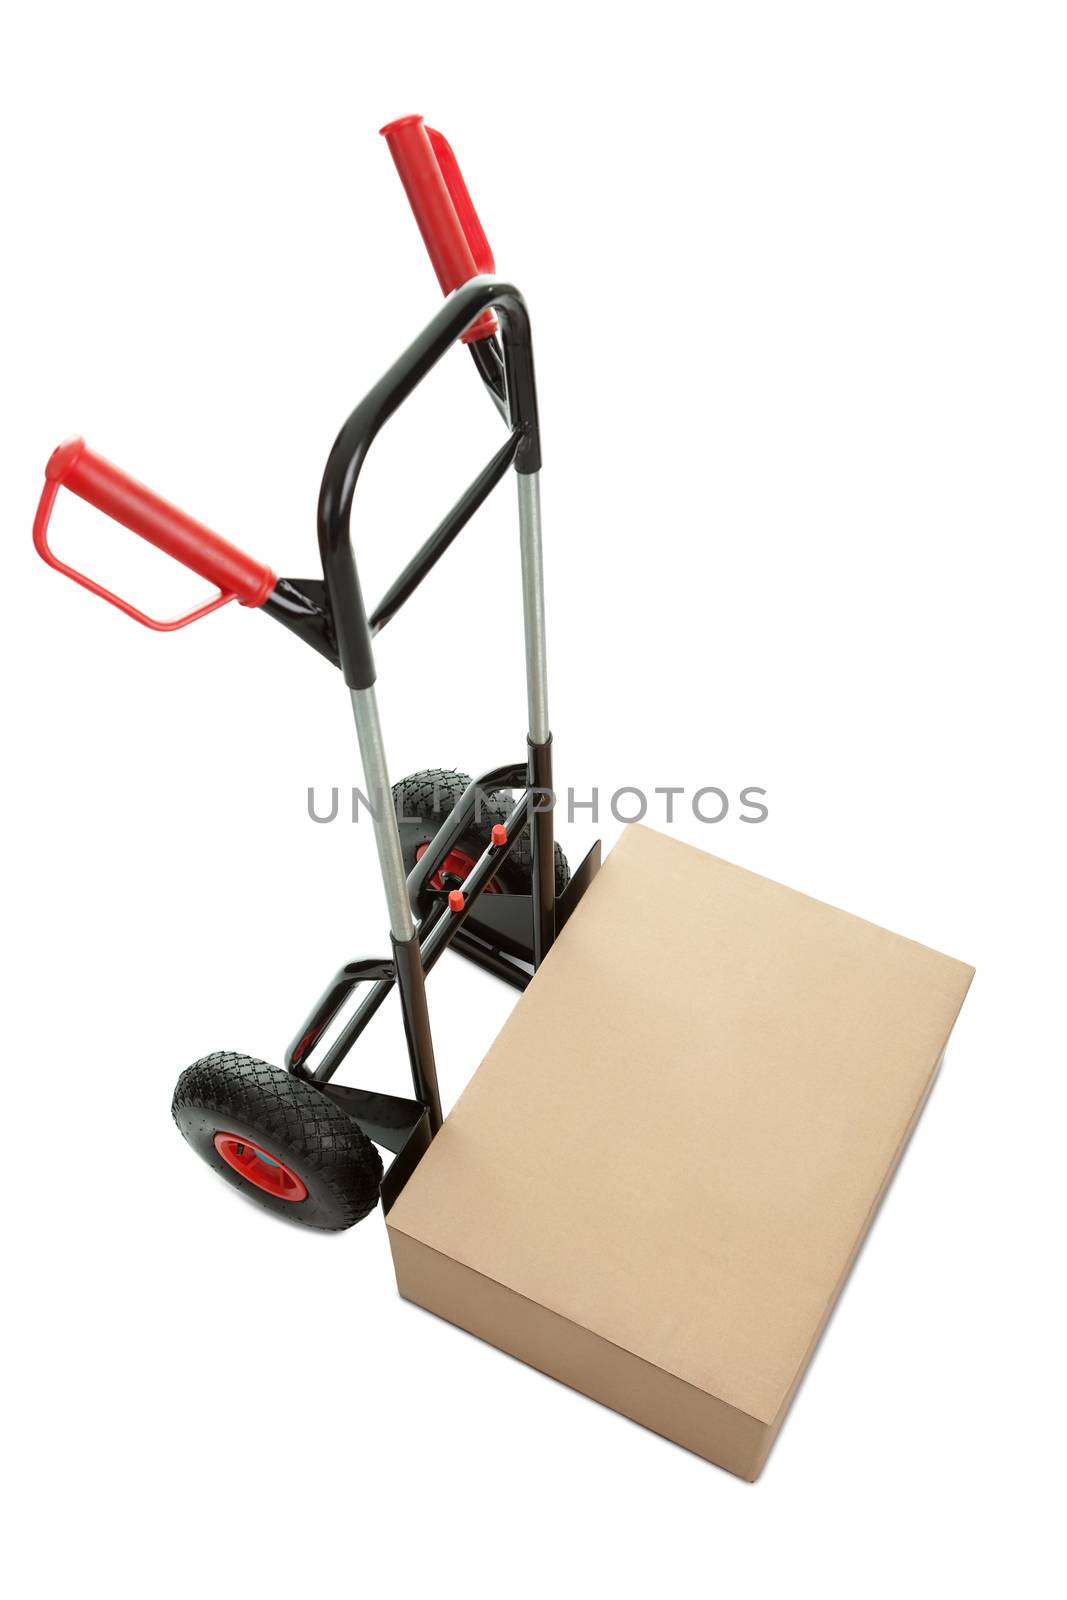 Brown cardboard box on hand truck isolated over white background